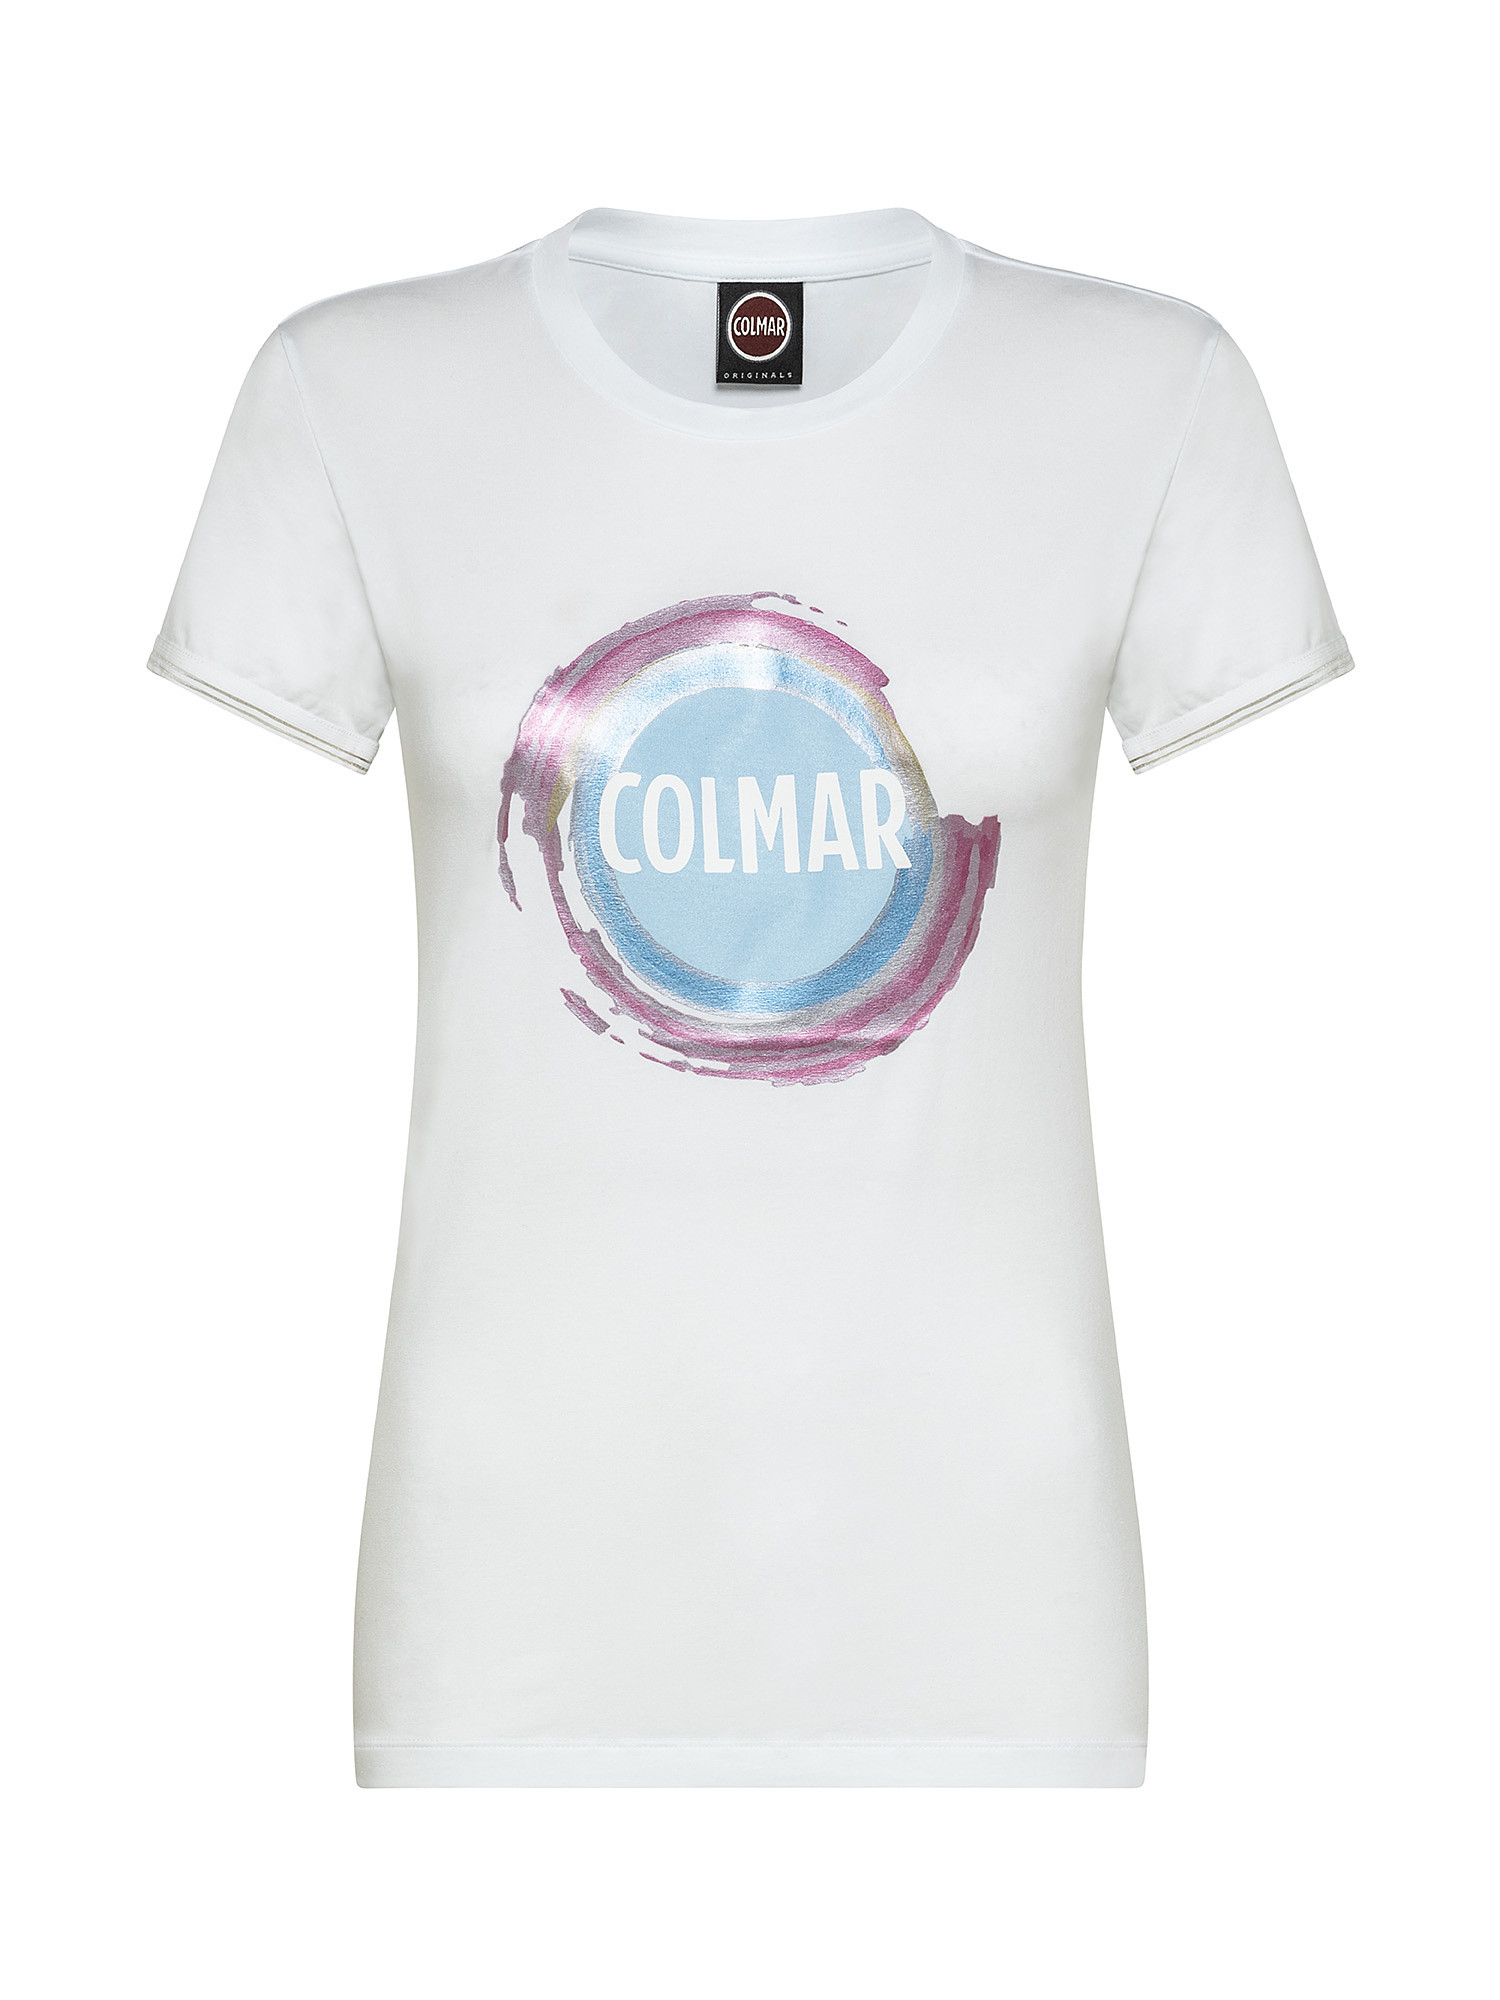 T-shirt con manica corta, Bianco, large image number 0